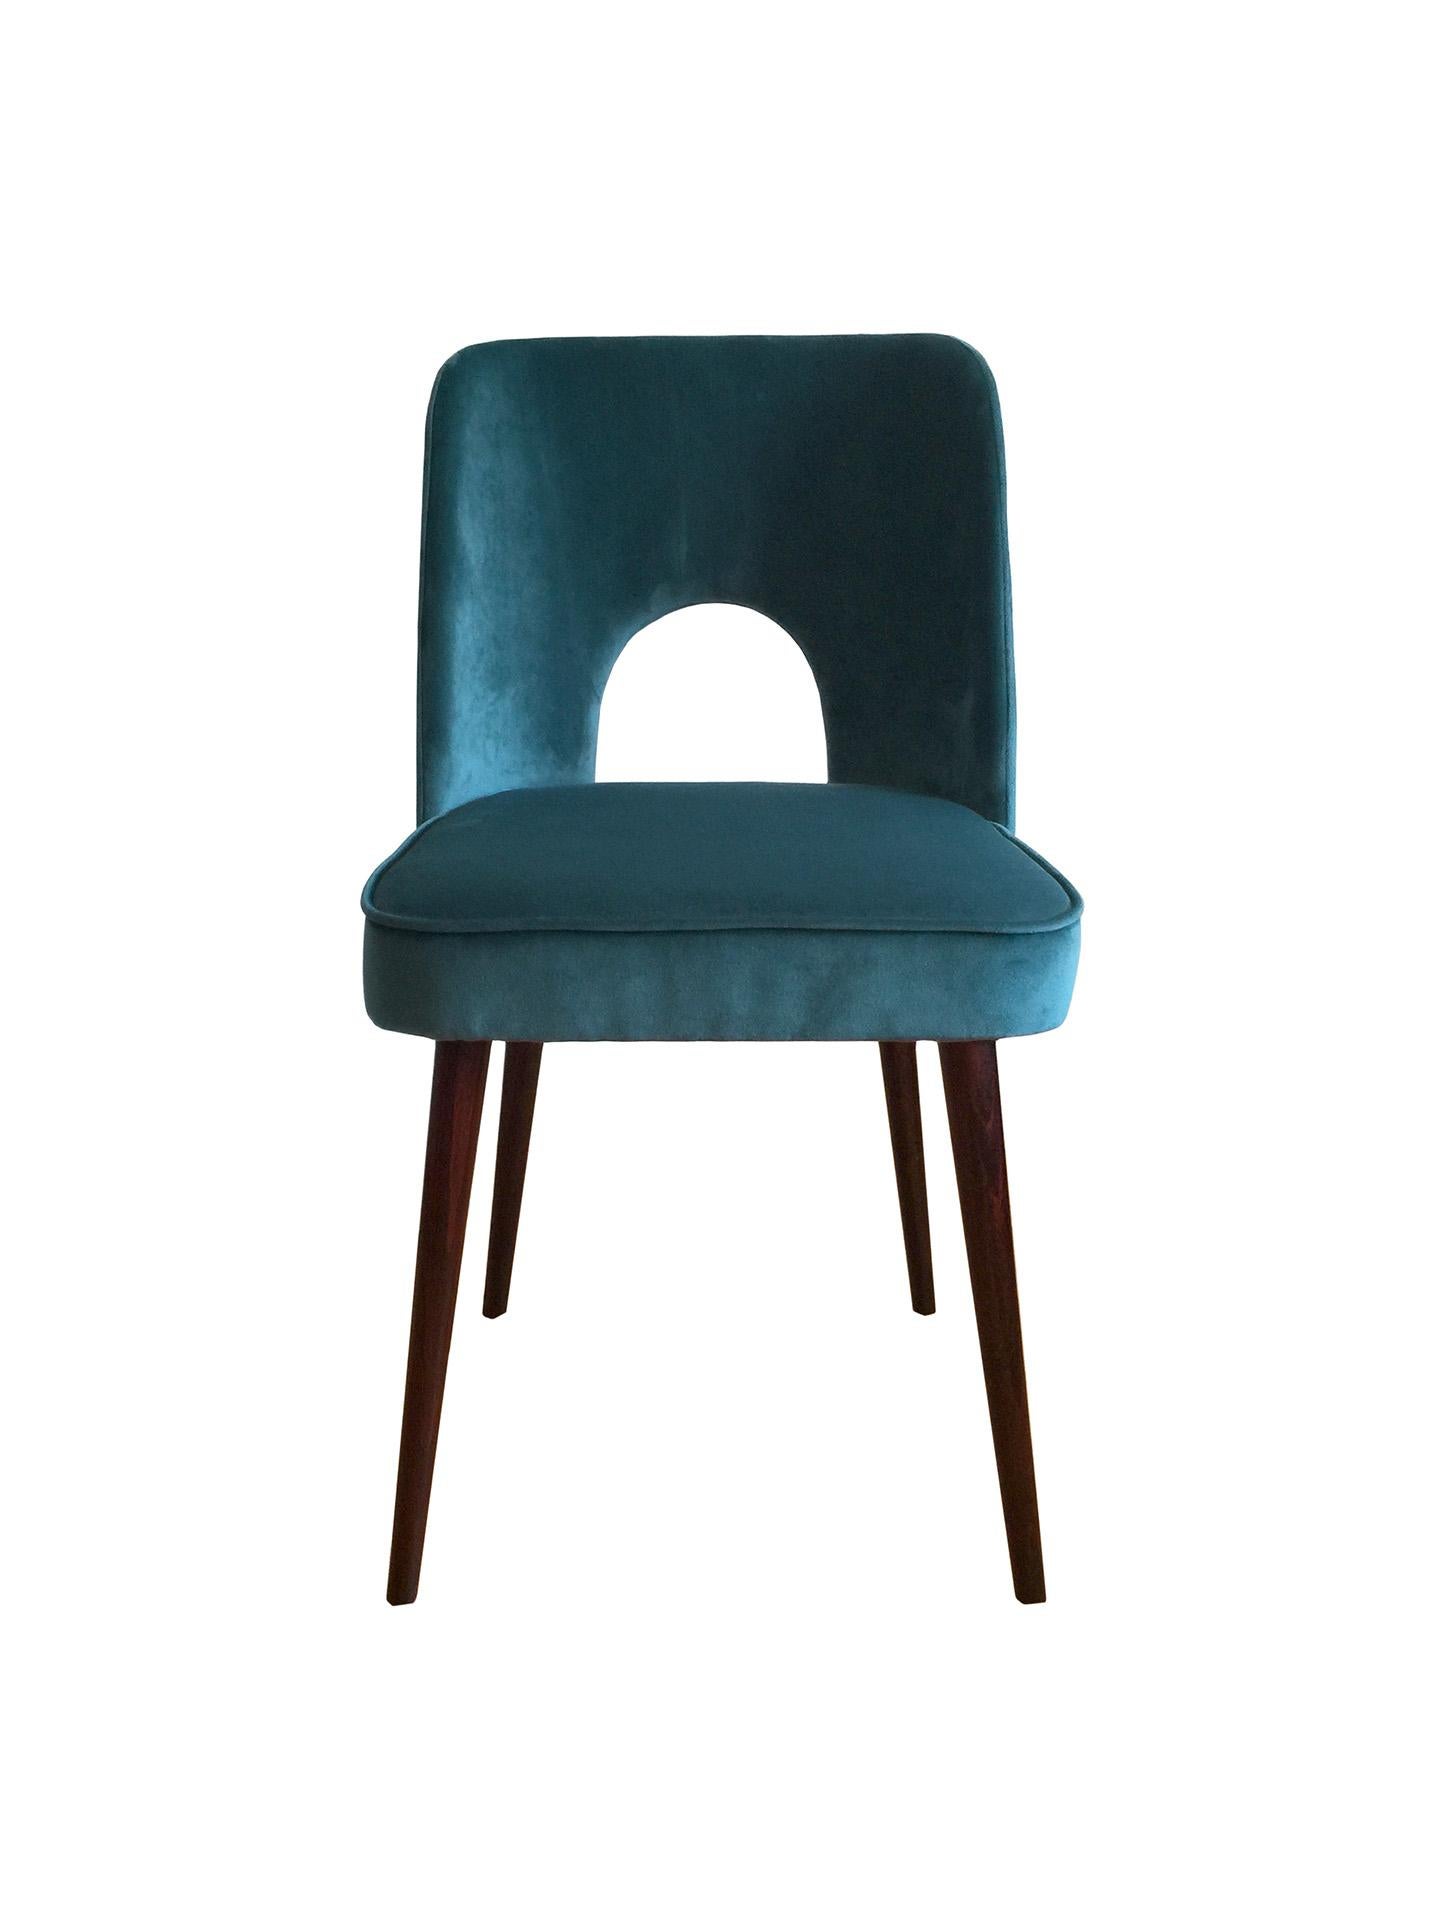 Mid-Century Modern Mid-Century Chairs by Leśniewski in Green Velvet, 1960s, Set of 2 For Sale